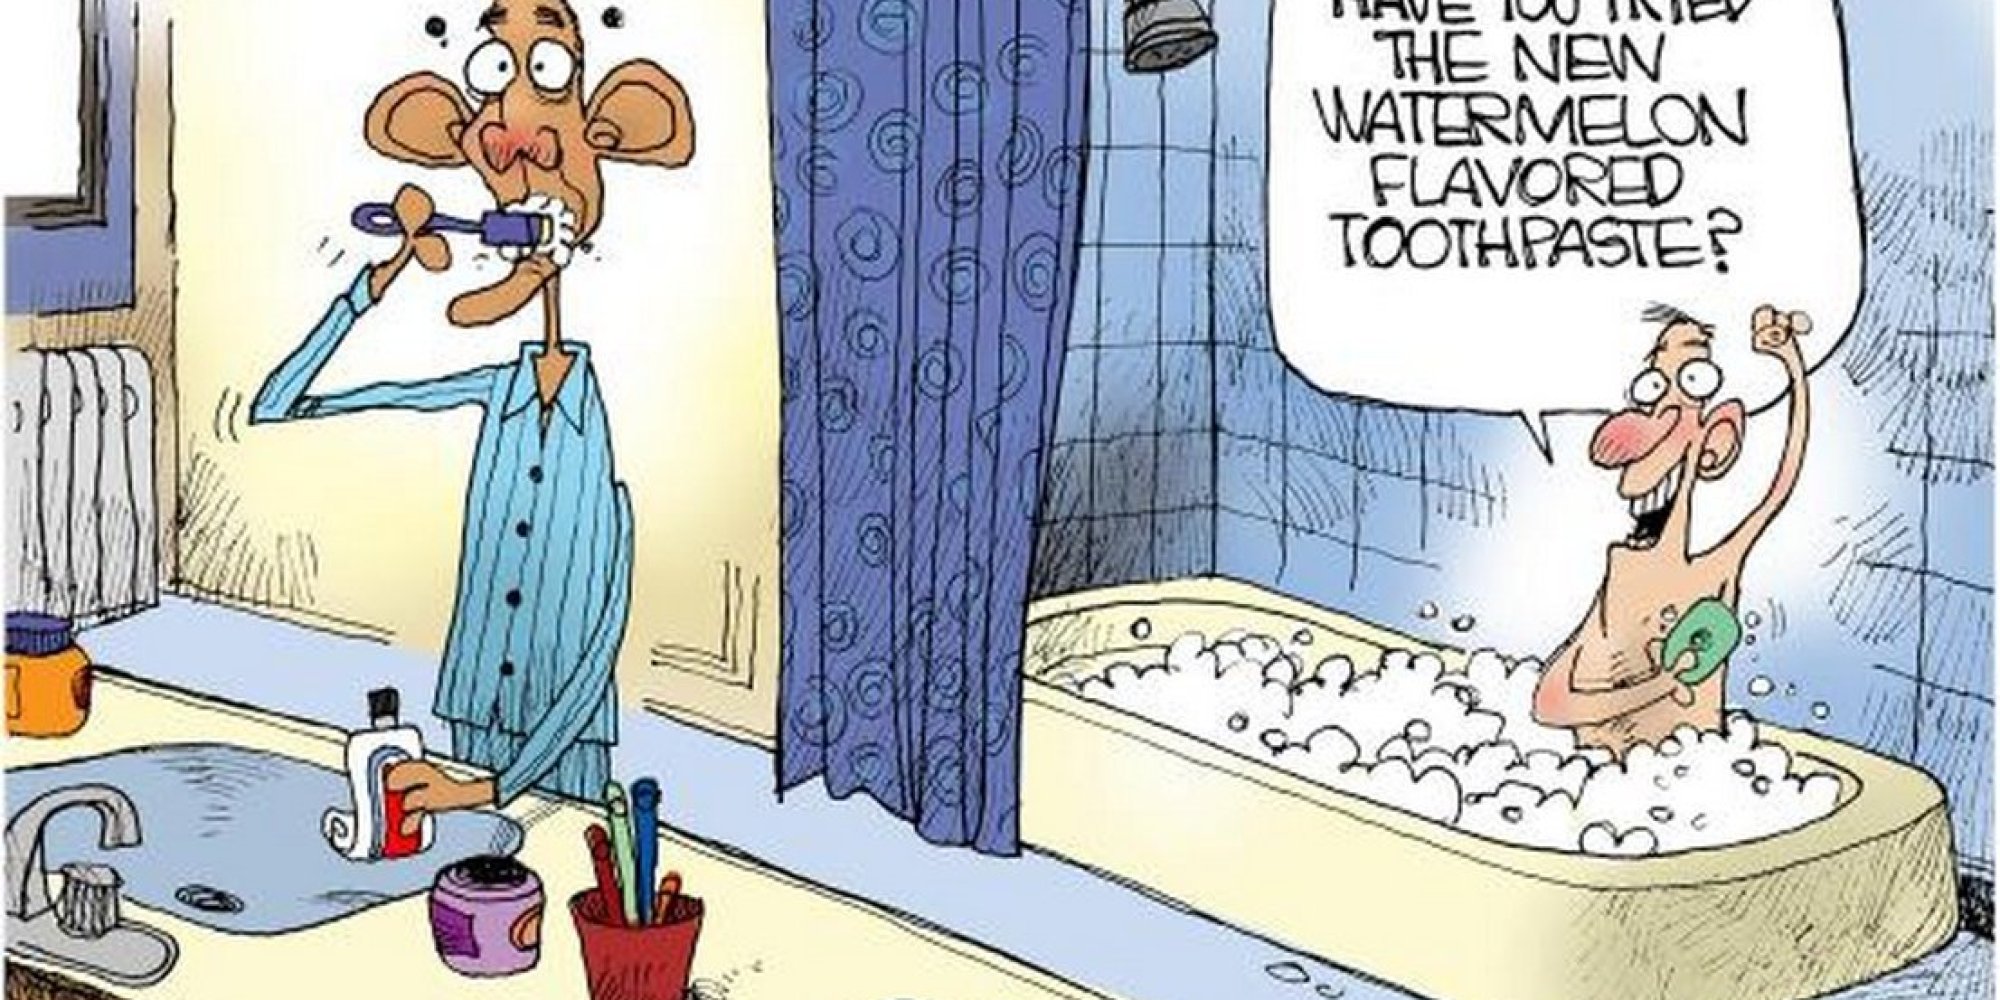 Newspaper Apologizes For Offensive Obama Cartoon, But Keeps It Up